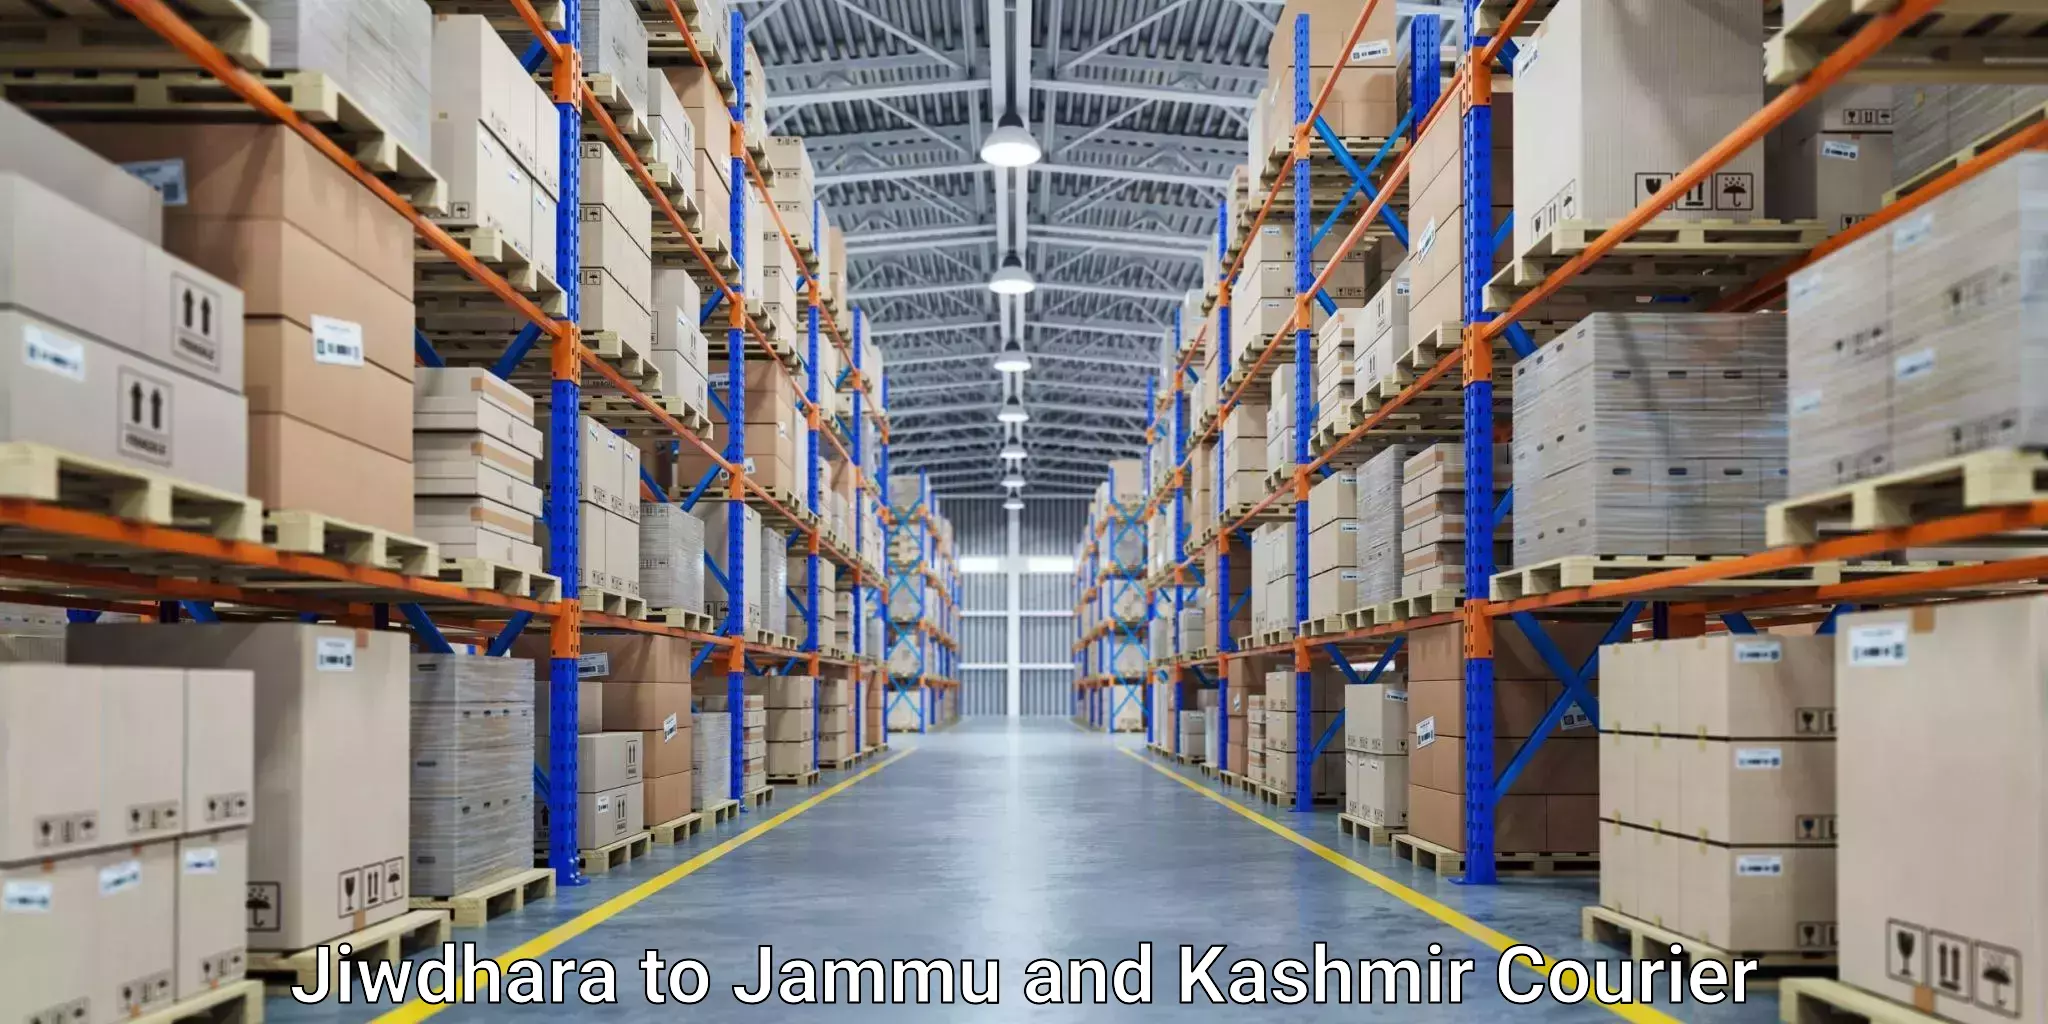 High value parcel delivery in Jiwdhara to Jammu and Kashmir